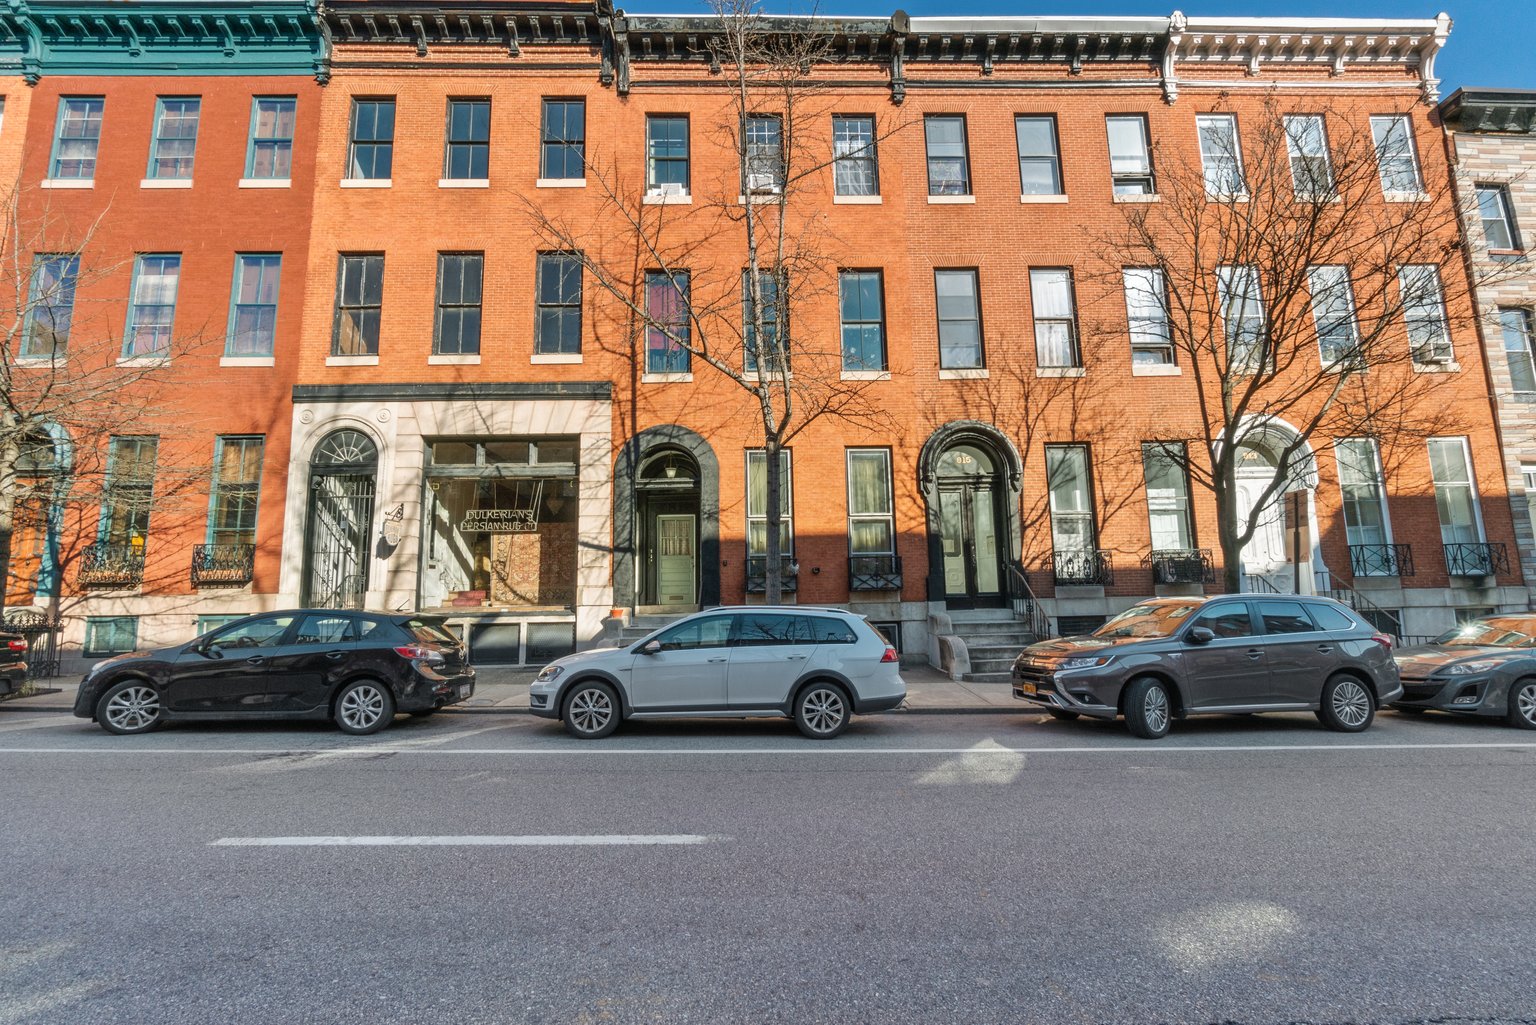 917 North Calvert St.: 6 Apartments/ Fully Leased in the heart of Historic Mount Vernon